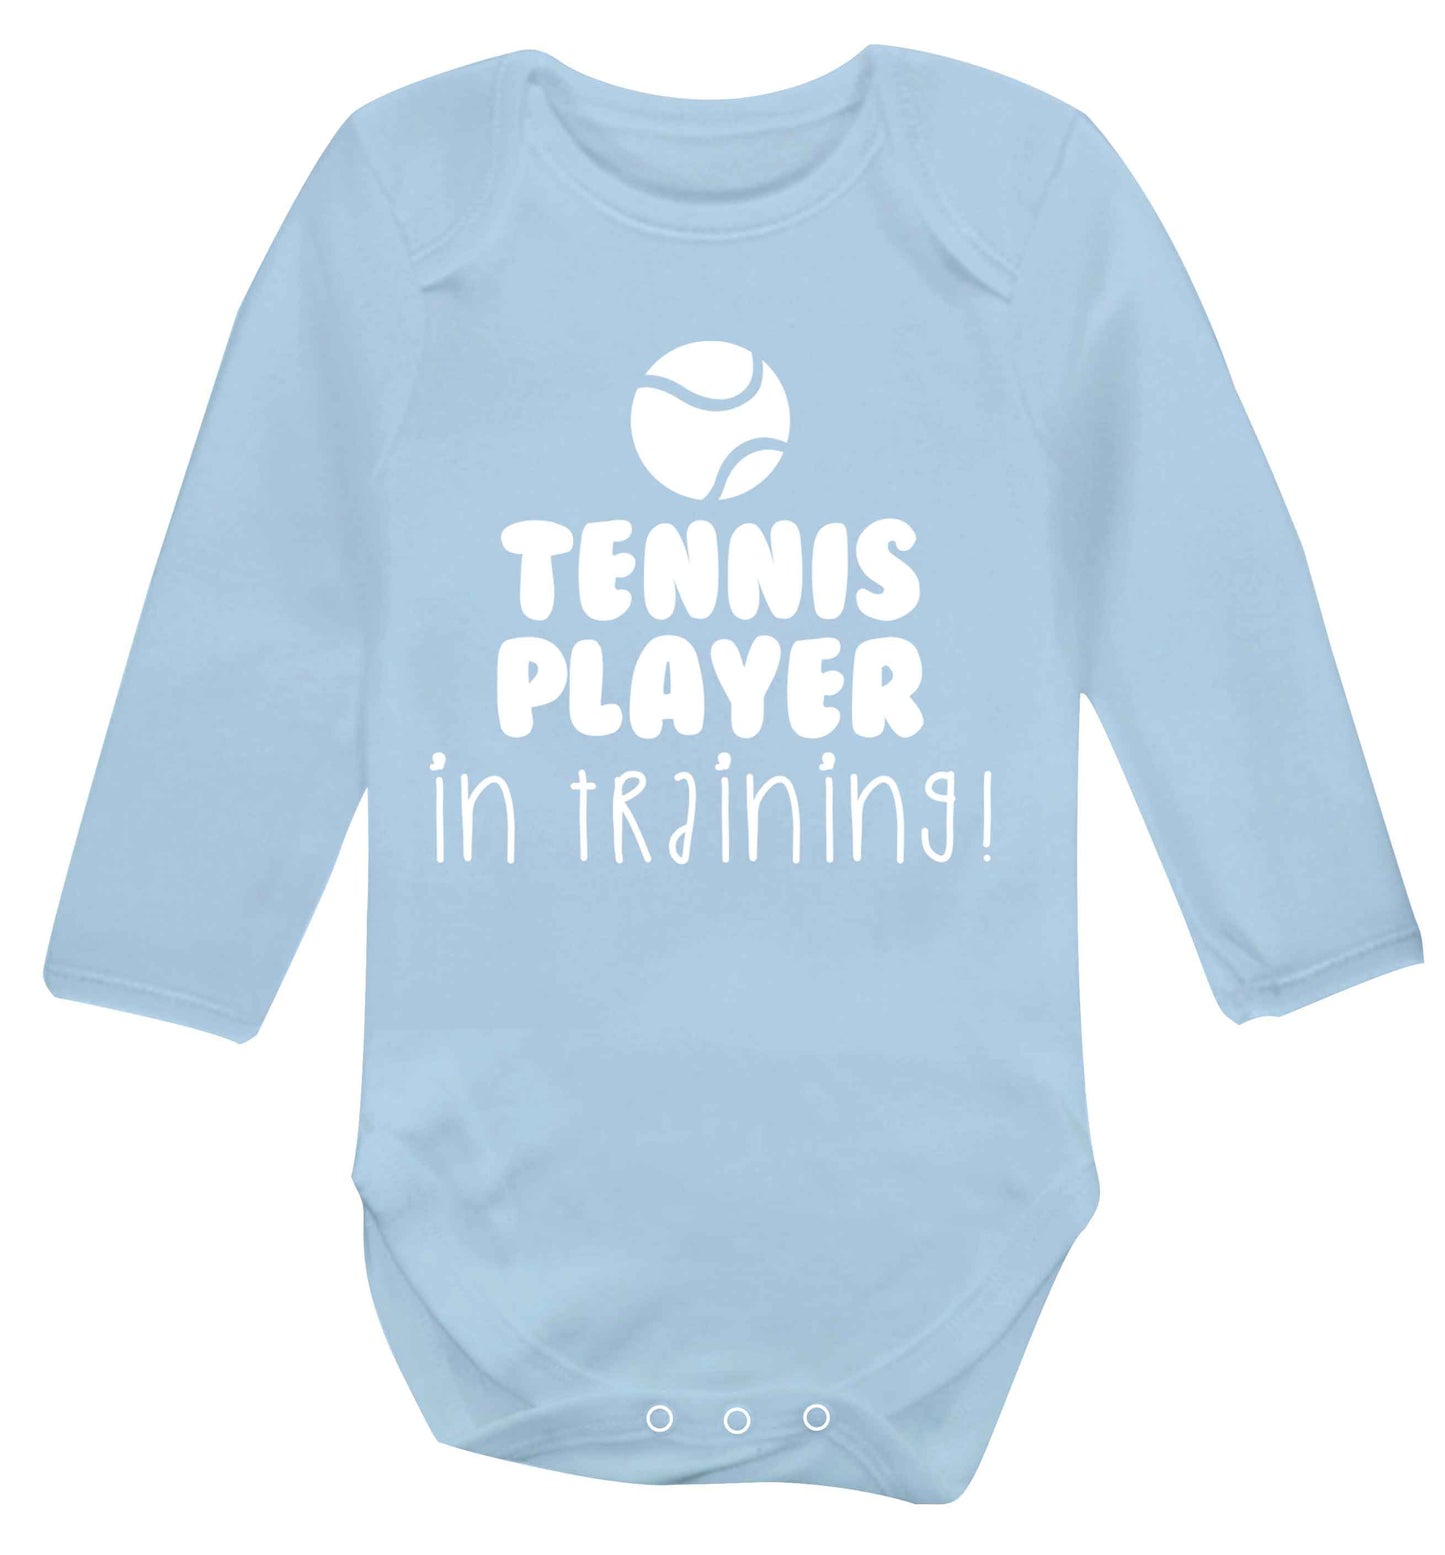 Tennis player in training Baby Vest long sleeved pale blue 6-12 months